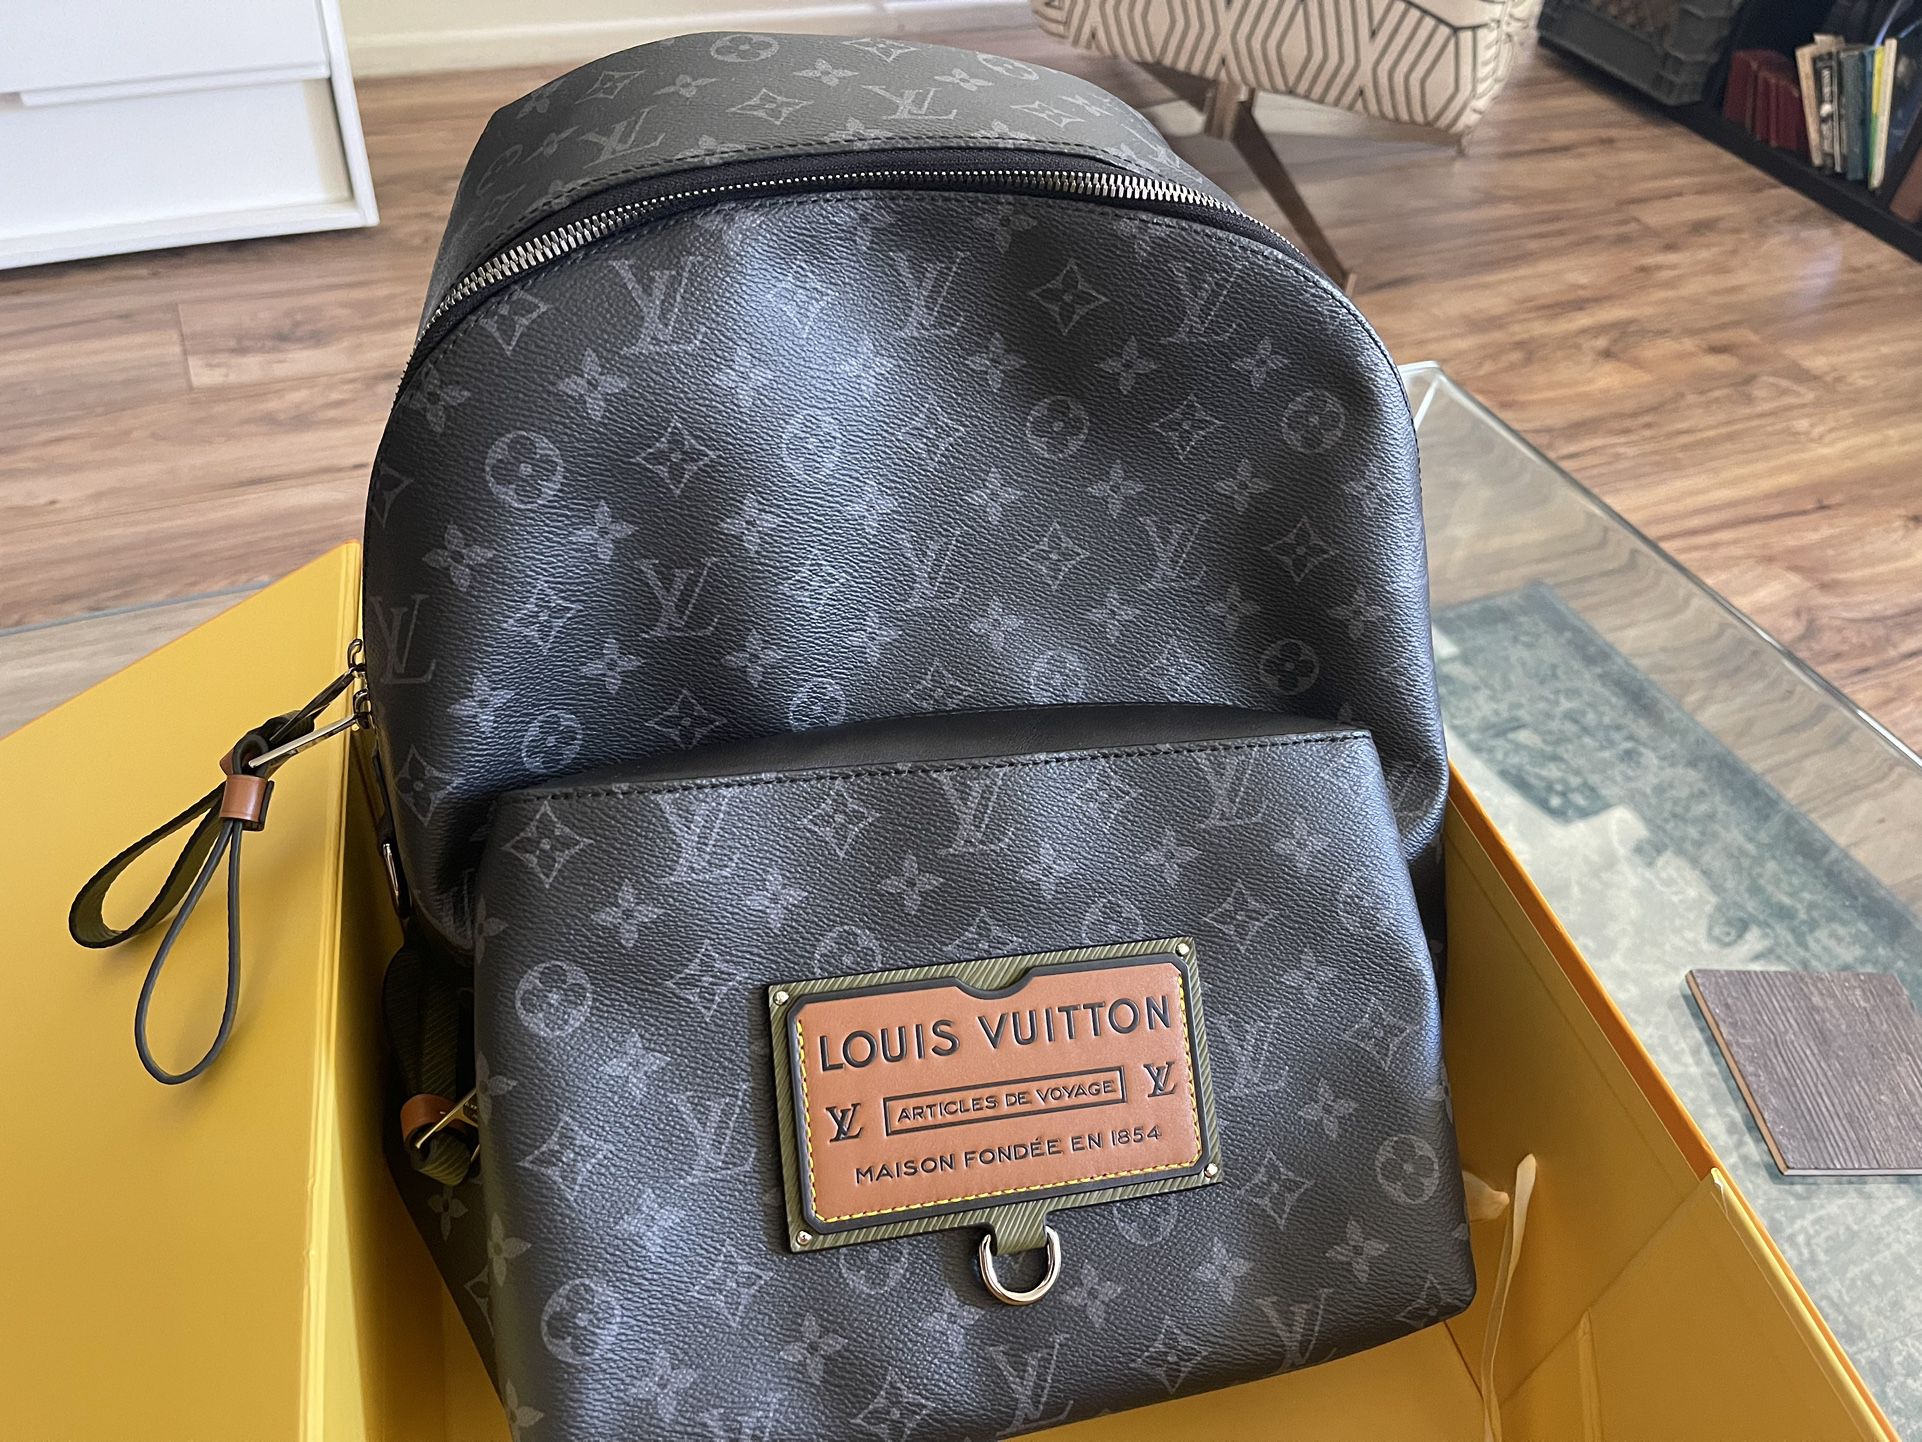 New Luis Vuitton Back Pack for Sale in Los Angeles, CA - OfferUp